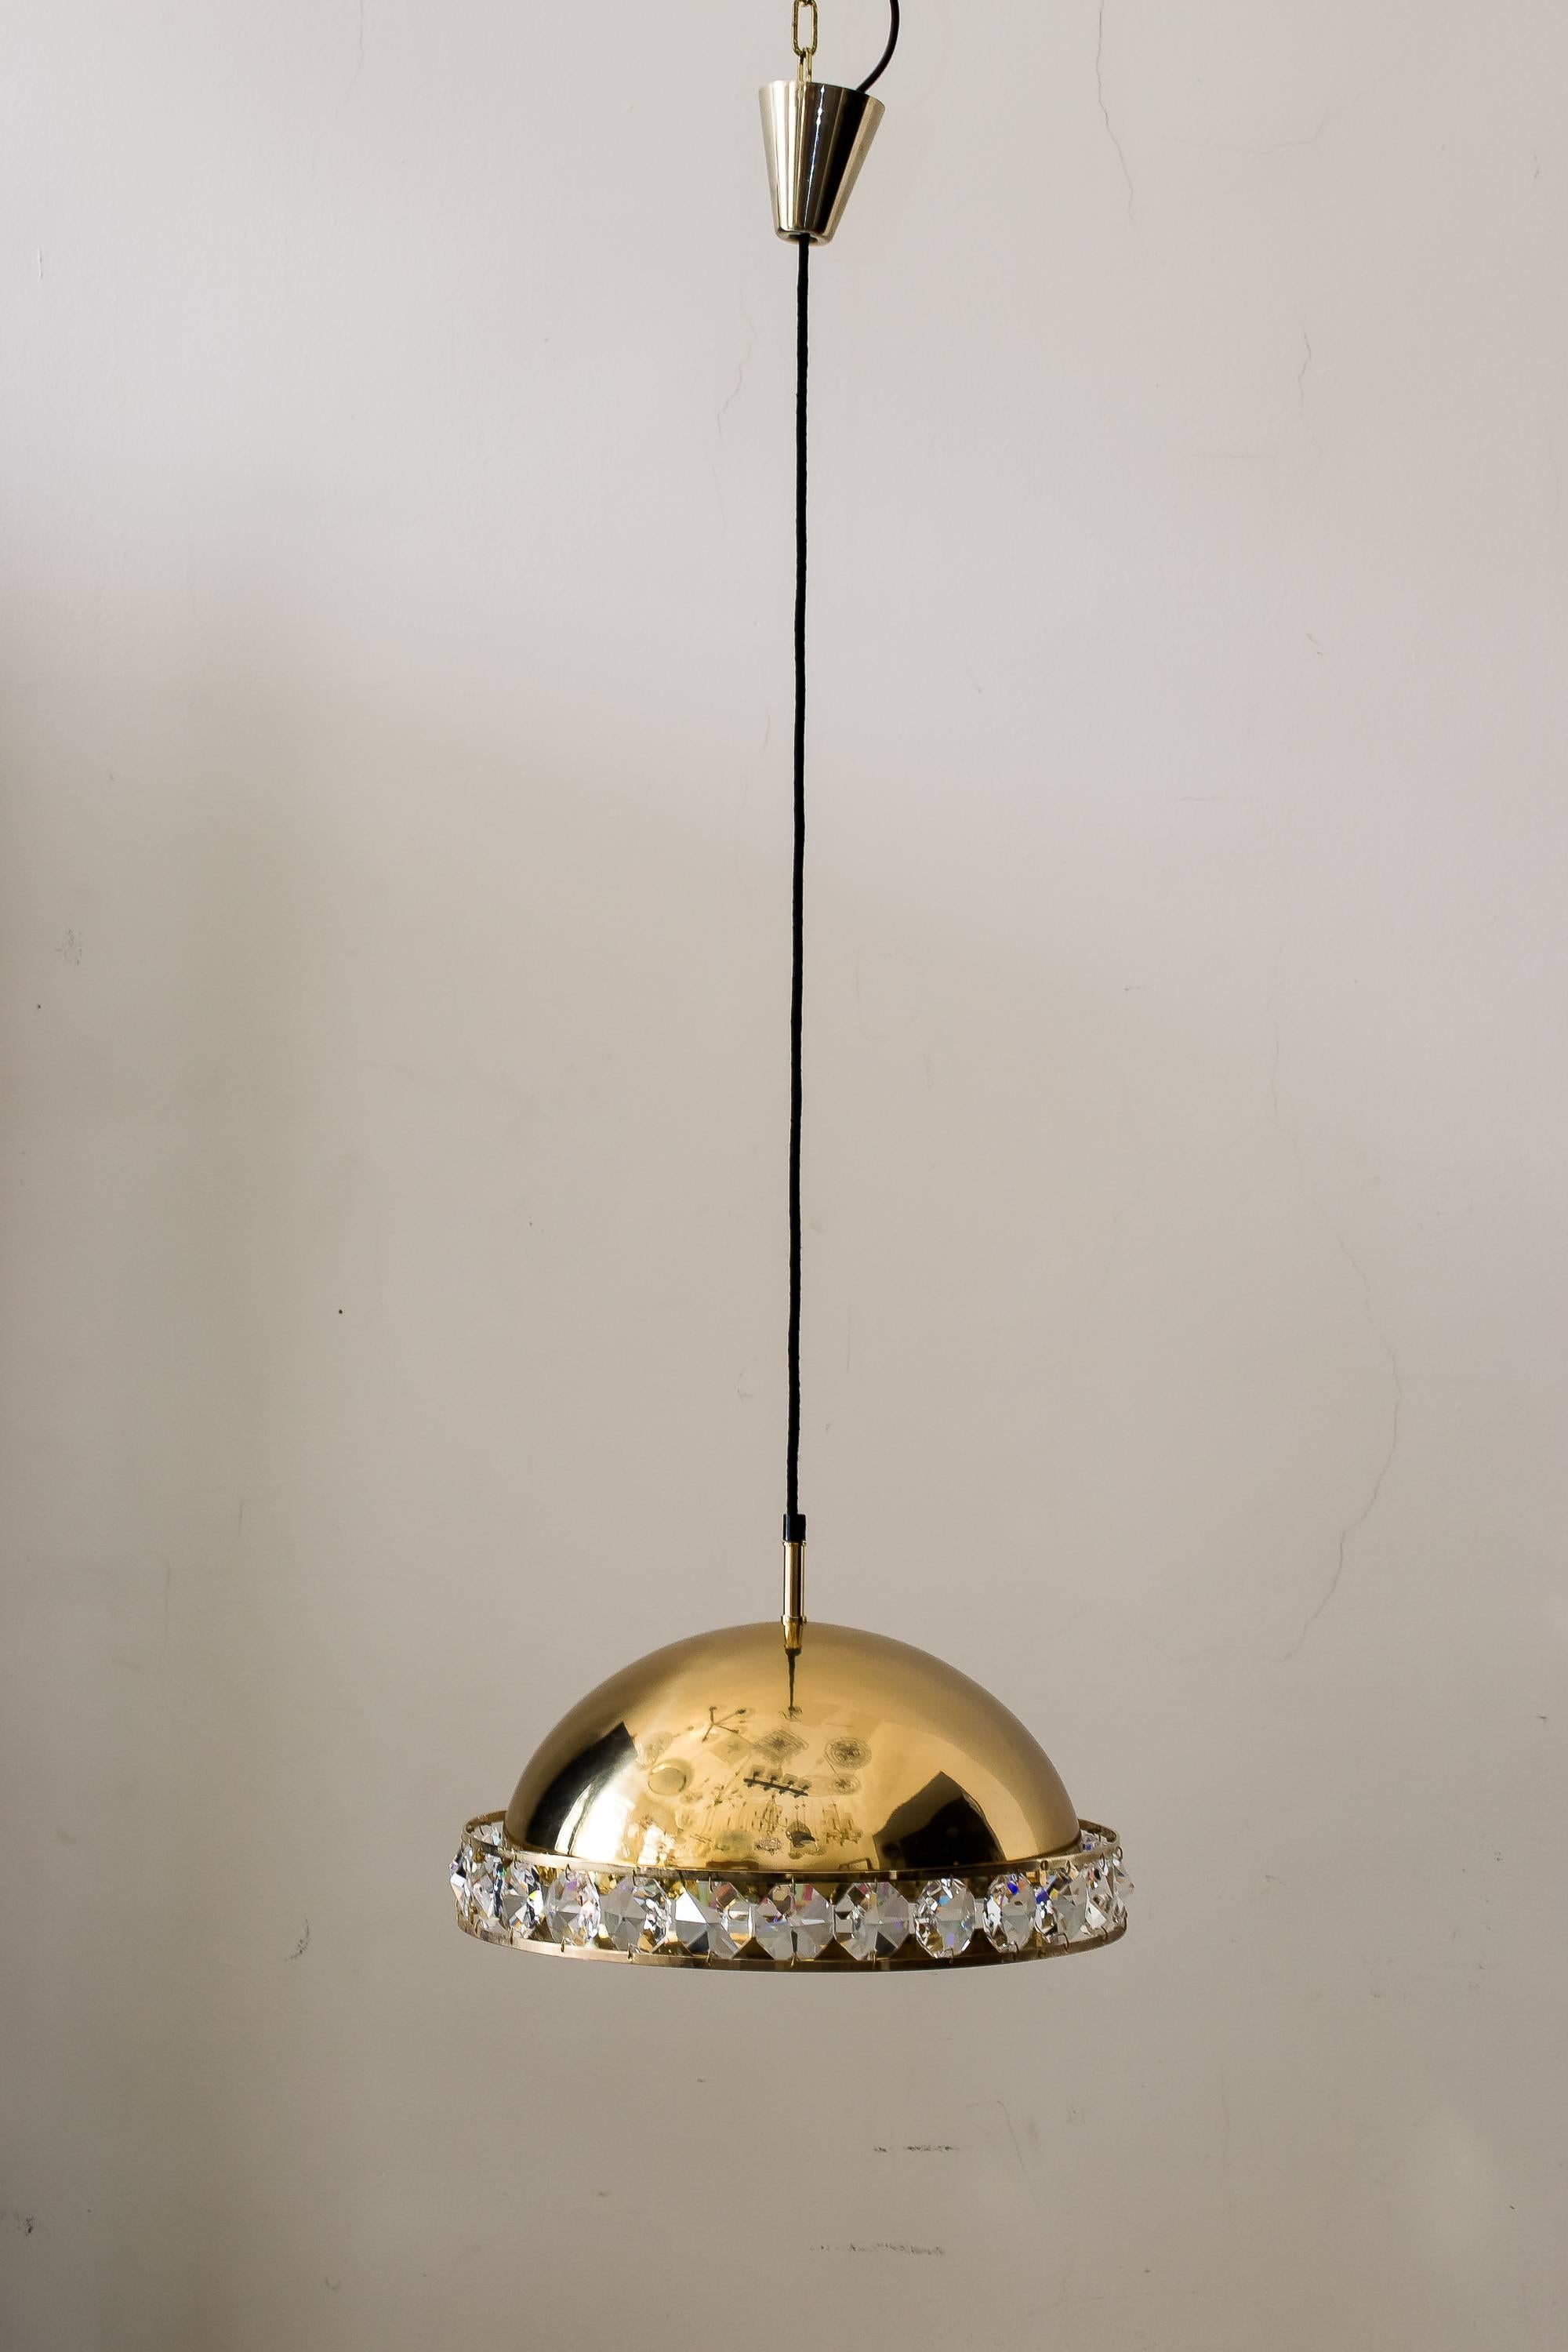 Hanging lamp, Vienna, circa 1960s
Original condition

Can be adjusted to the room height.